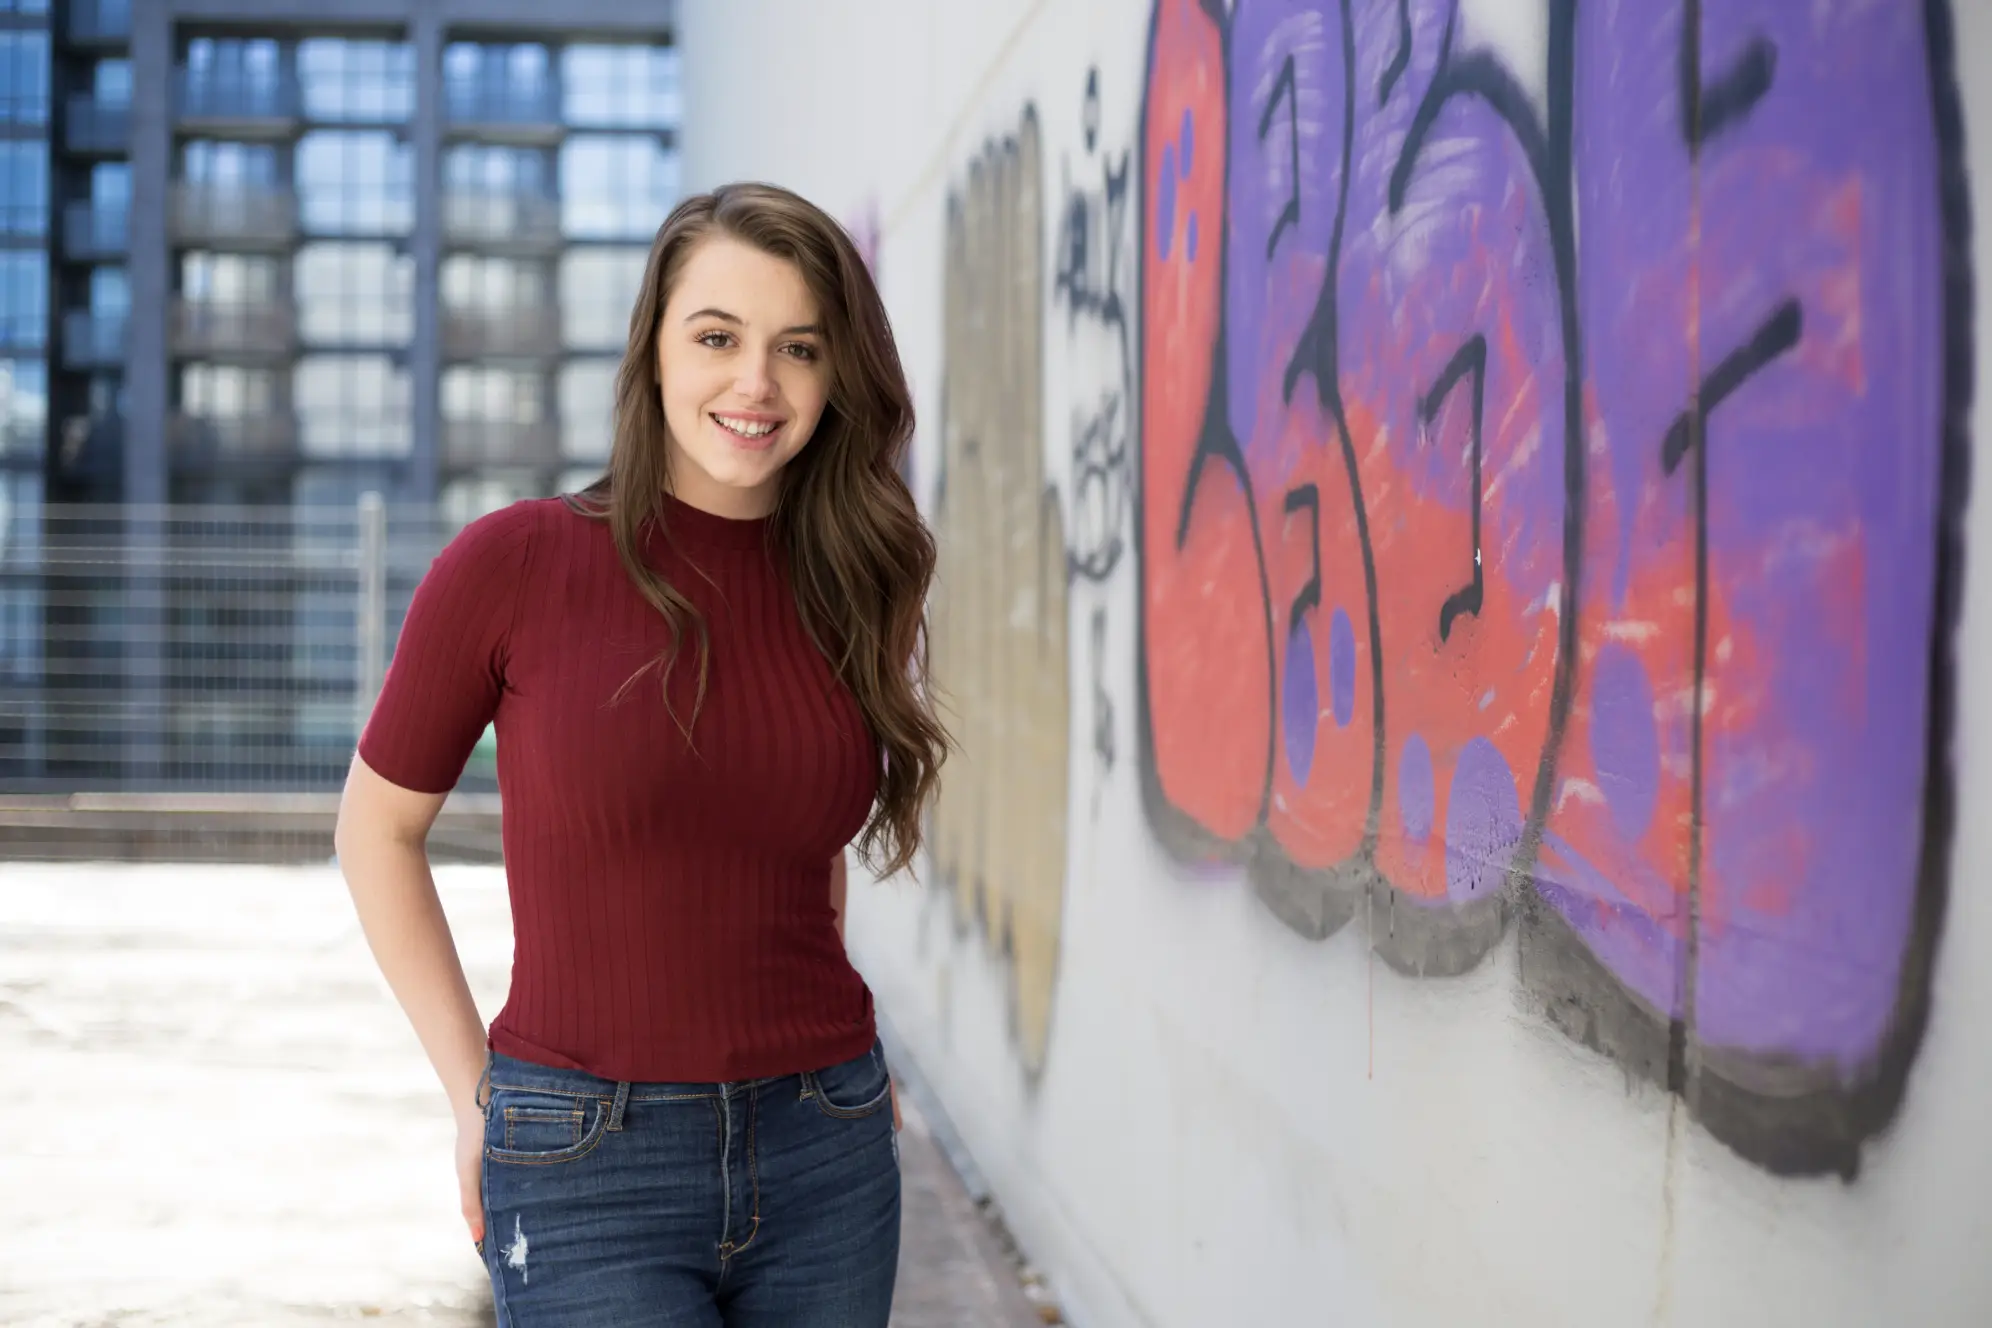 Young woman in burgundy shirt with long hair and standing in front of a wall with graffiti